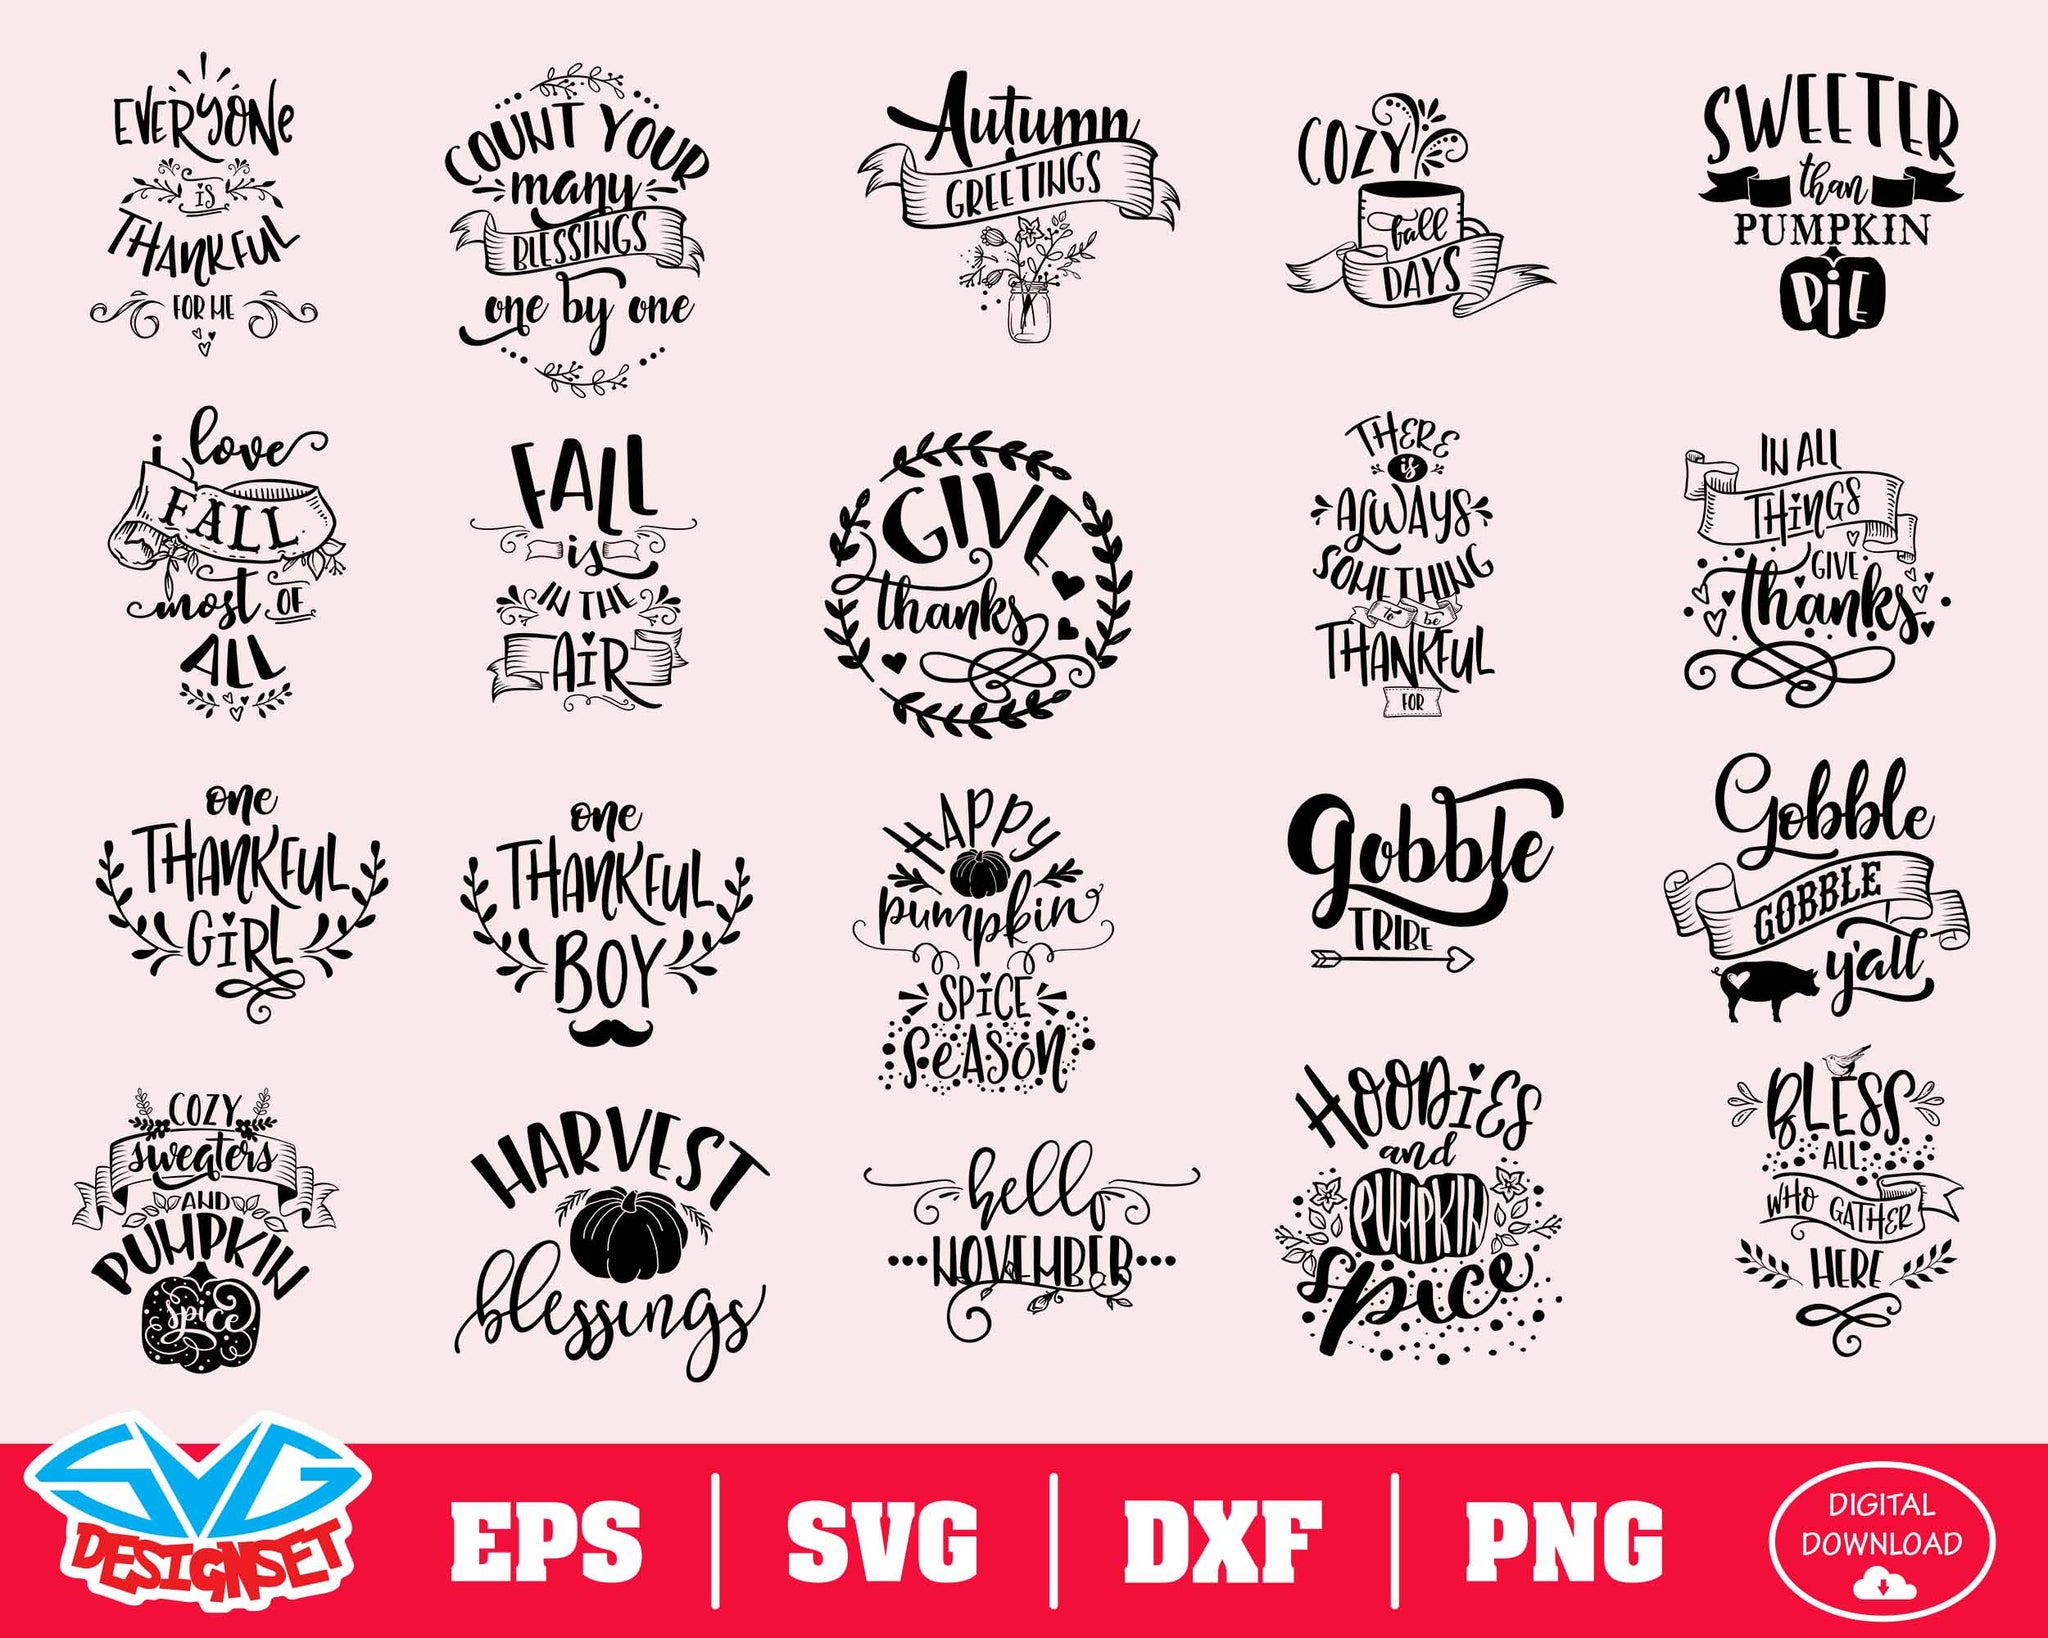 Thanksgiving Svg, Dxf, Eps, Png, Clipart, Silhouette and Cutfiles #6 - SVGDesignSets